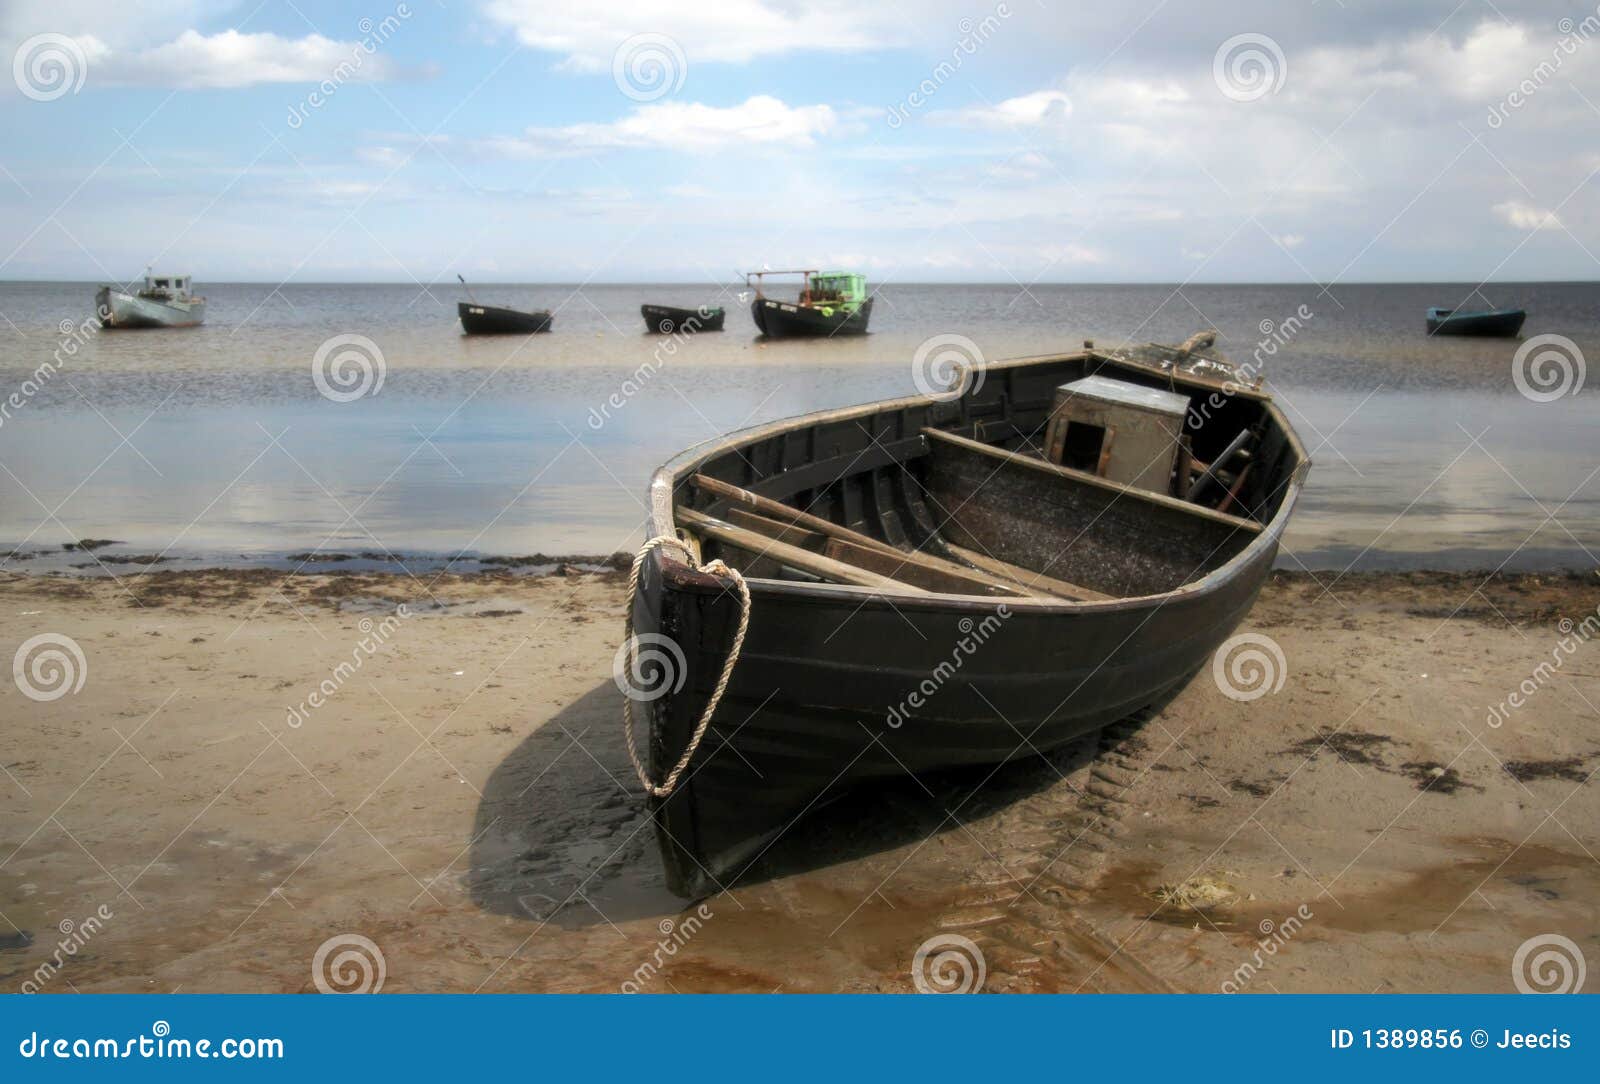 Old Boat Royalty Free Stock Image - Image: 1389856